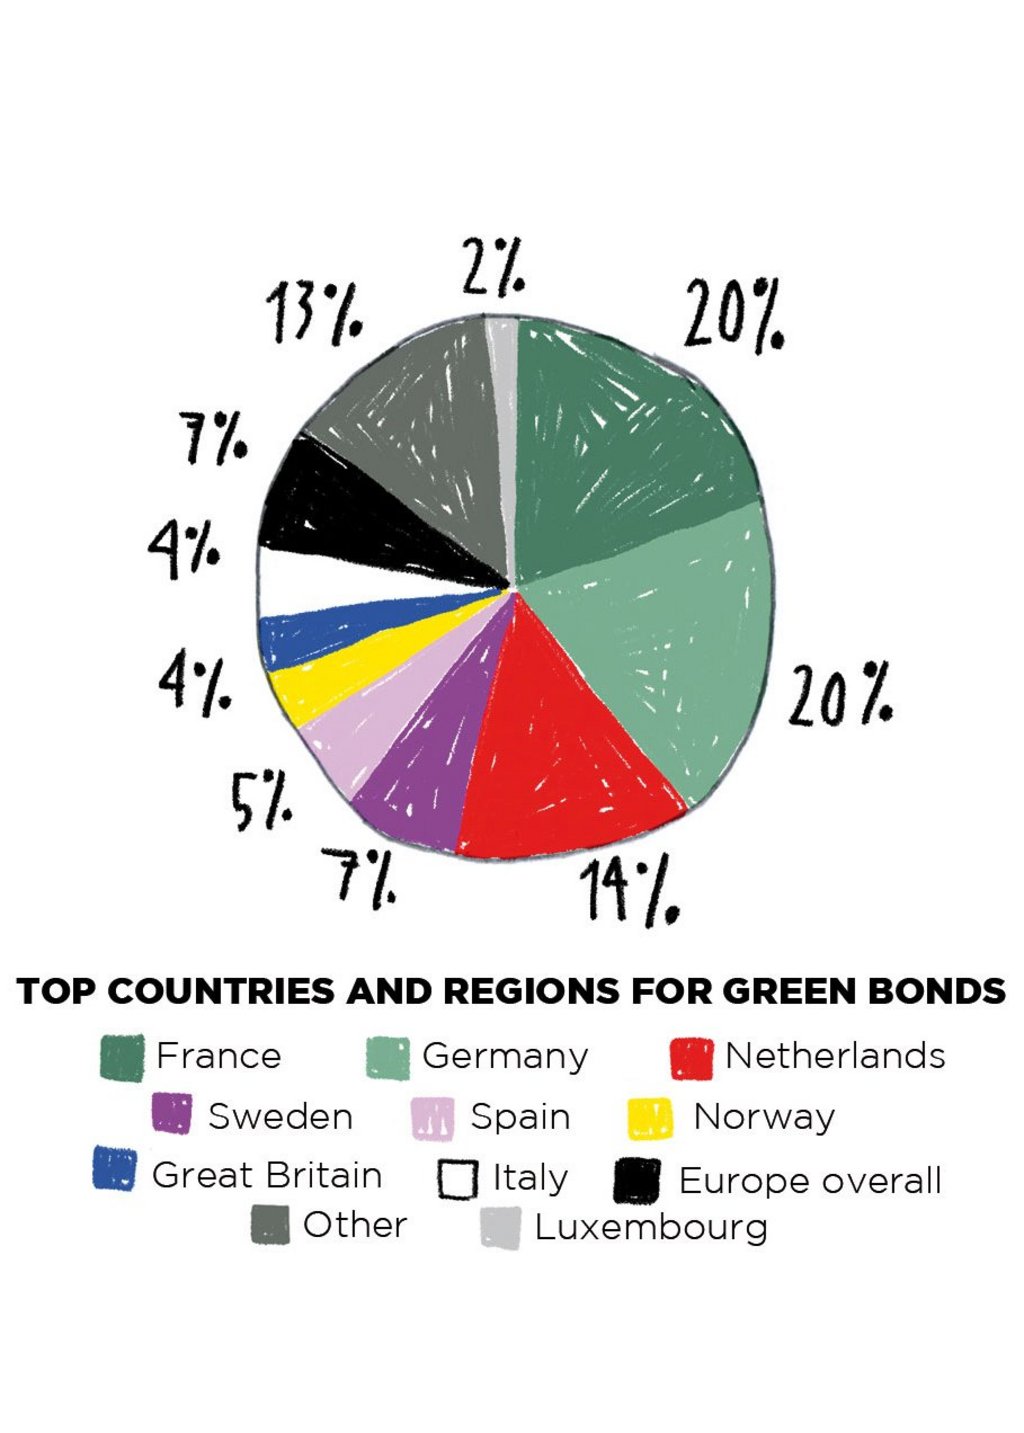 Illustration of a pie chart that makes visible which countries own which share of sustainable investments. France and Germany each have the largest share with 20 percent.